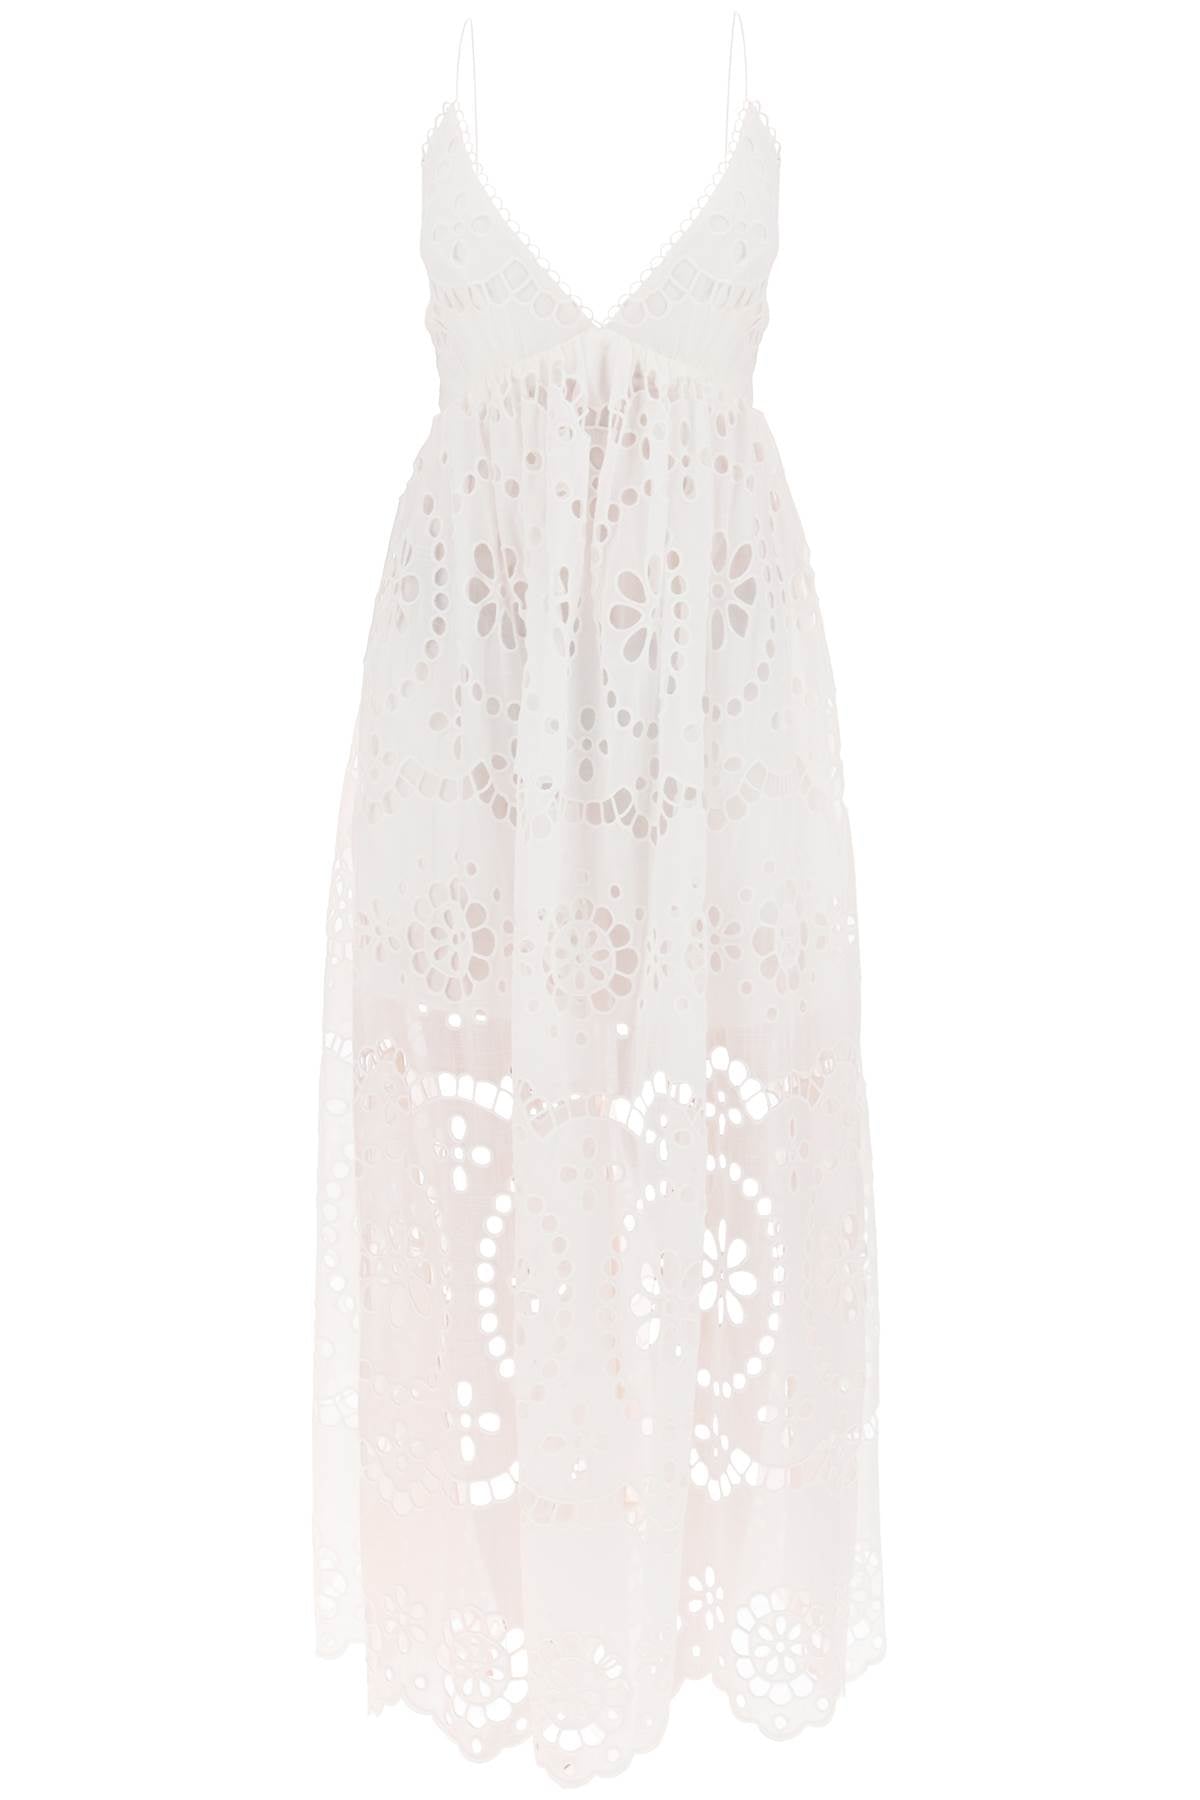 Zimmermann lexi maxi dress in broderie anglaise-0